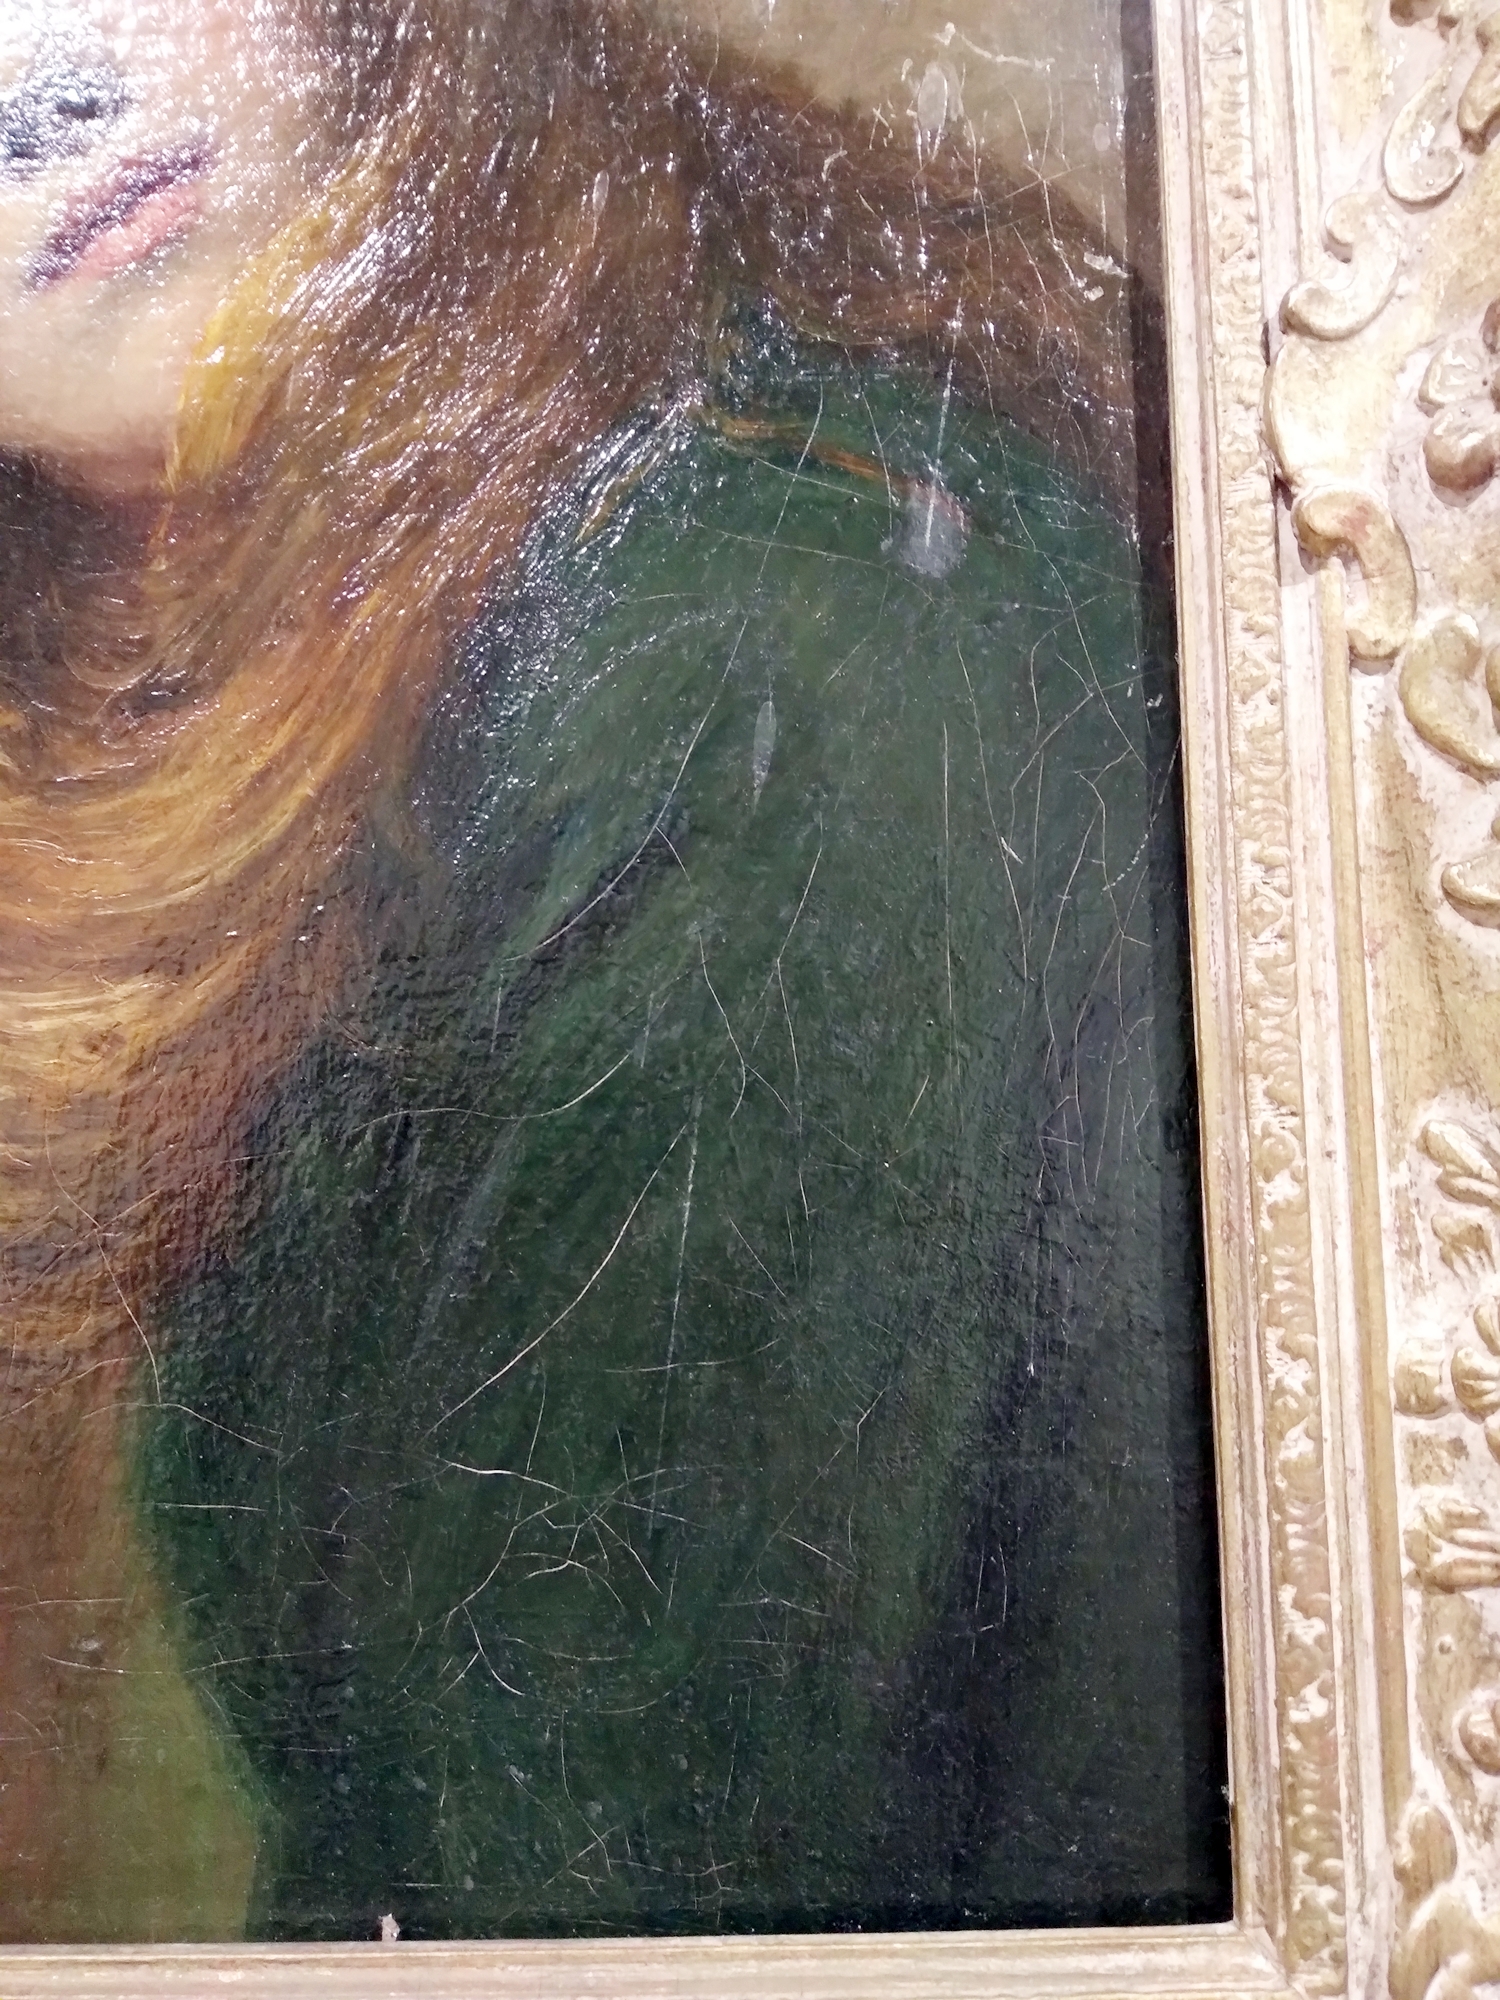 Late 19th century British School Oil on canvas Portrait of a young woman with windswept red hair - Image 5 of 12